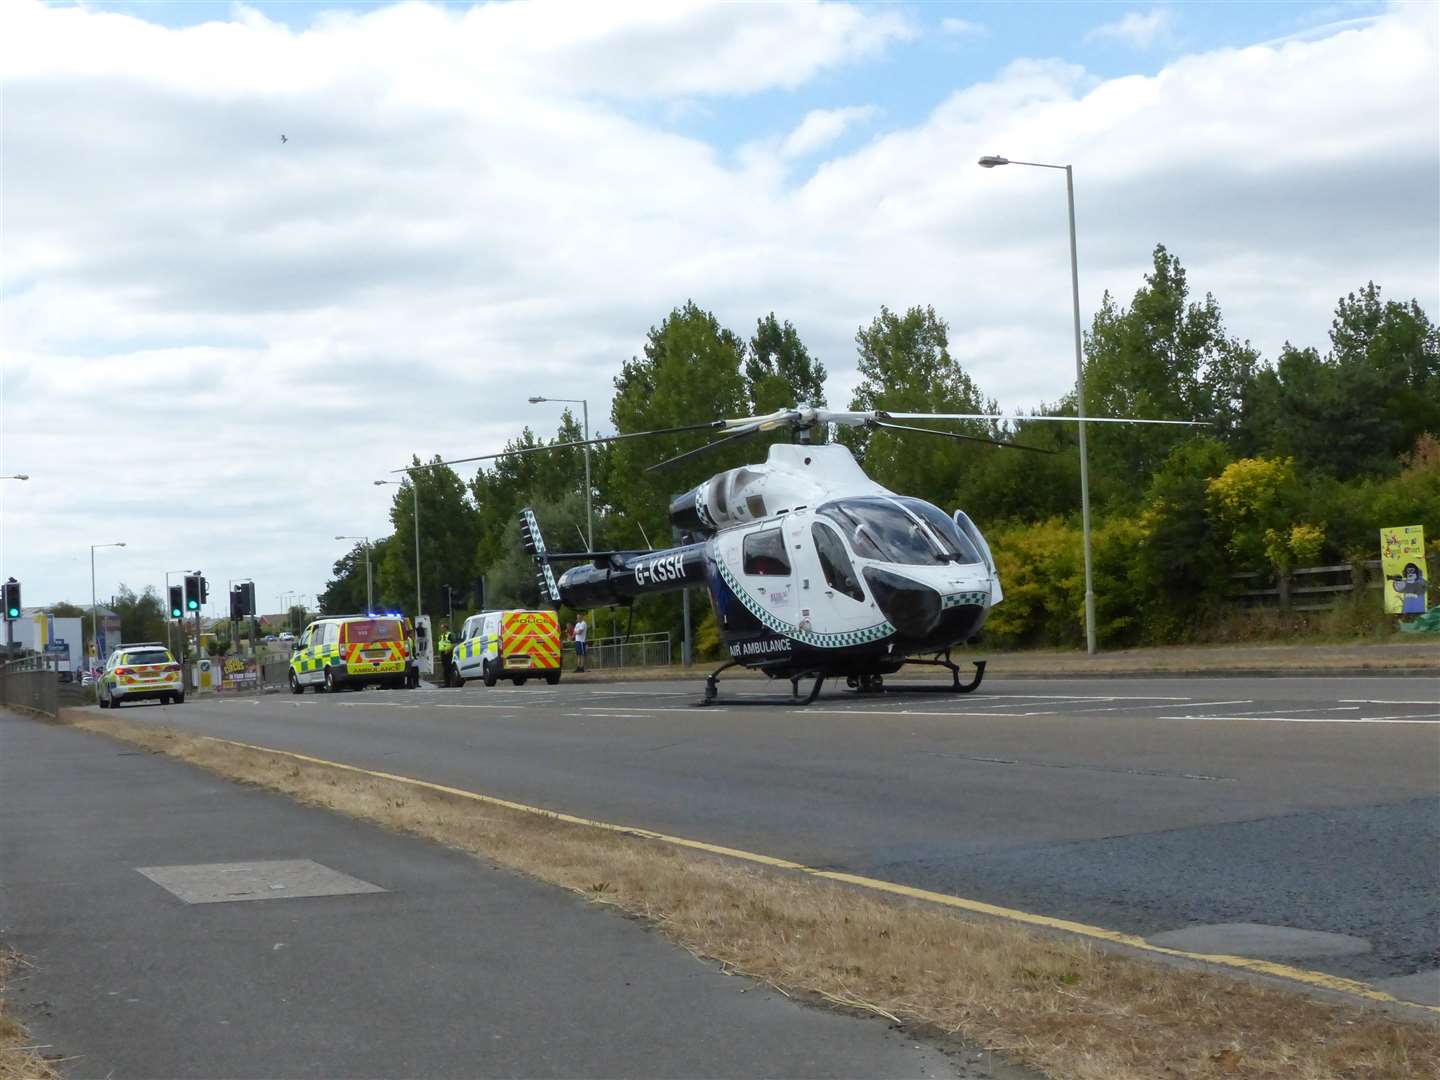 The air ambulance at the scene. Picture: Andy Clark